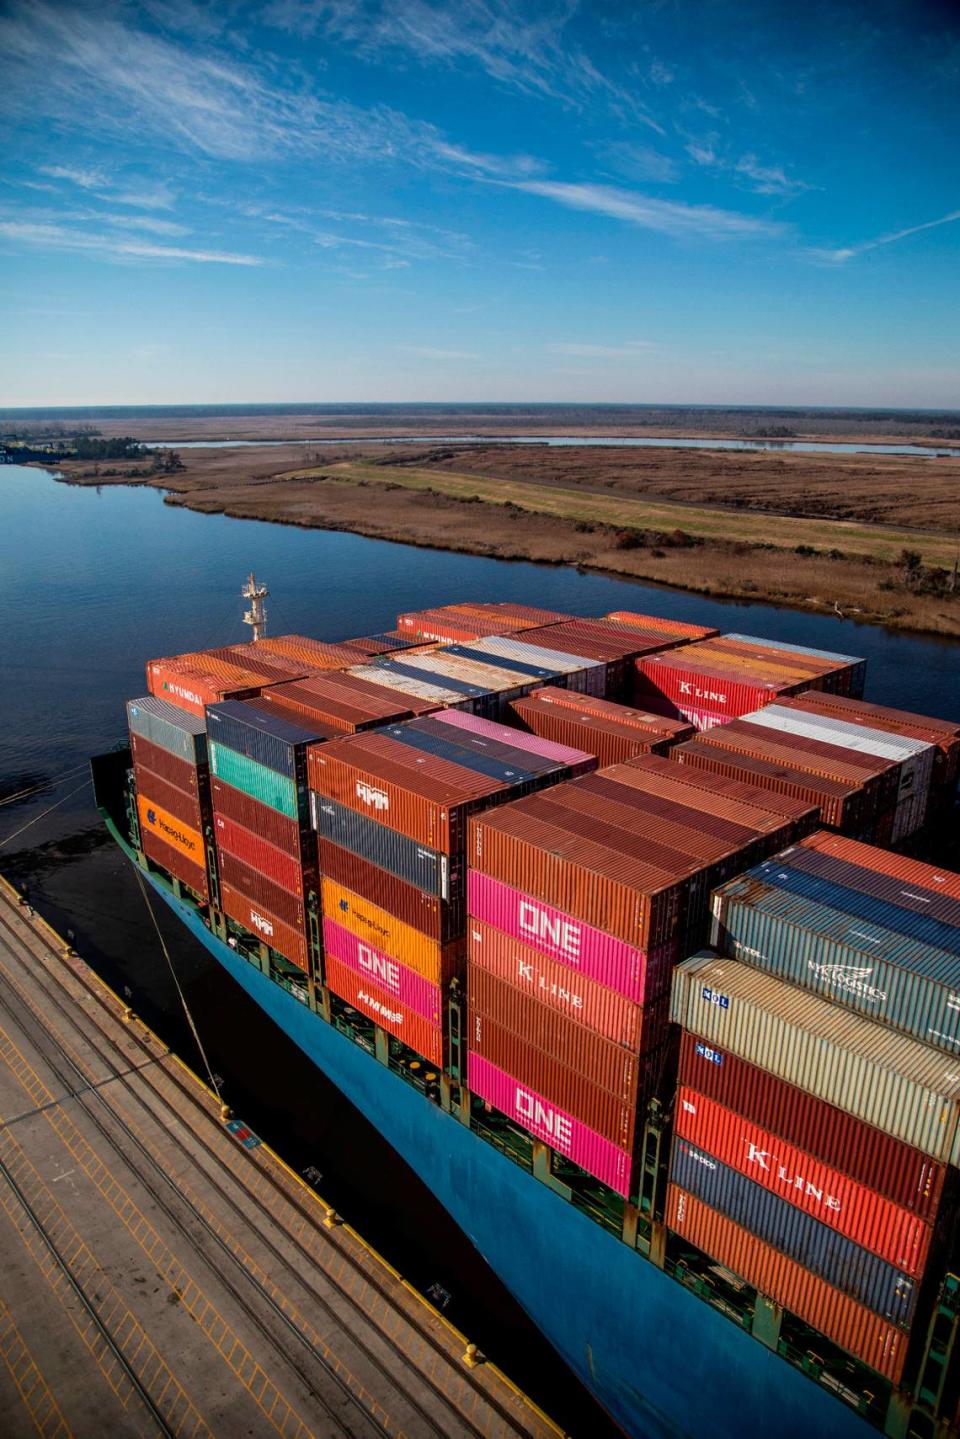 The container ship Hyundai Speed was berthed in December 2021 at the Port of Wilmington. Travis Long/tlong@newsobserver.com